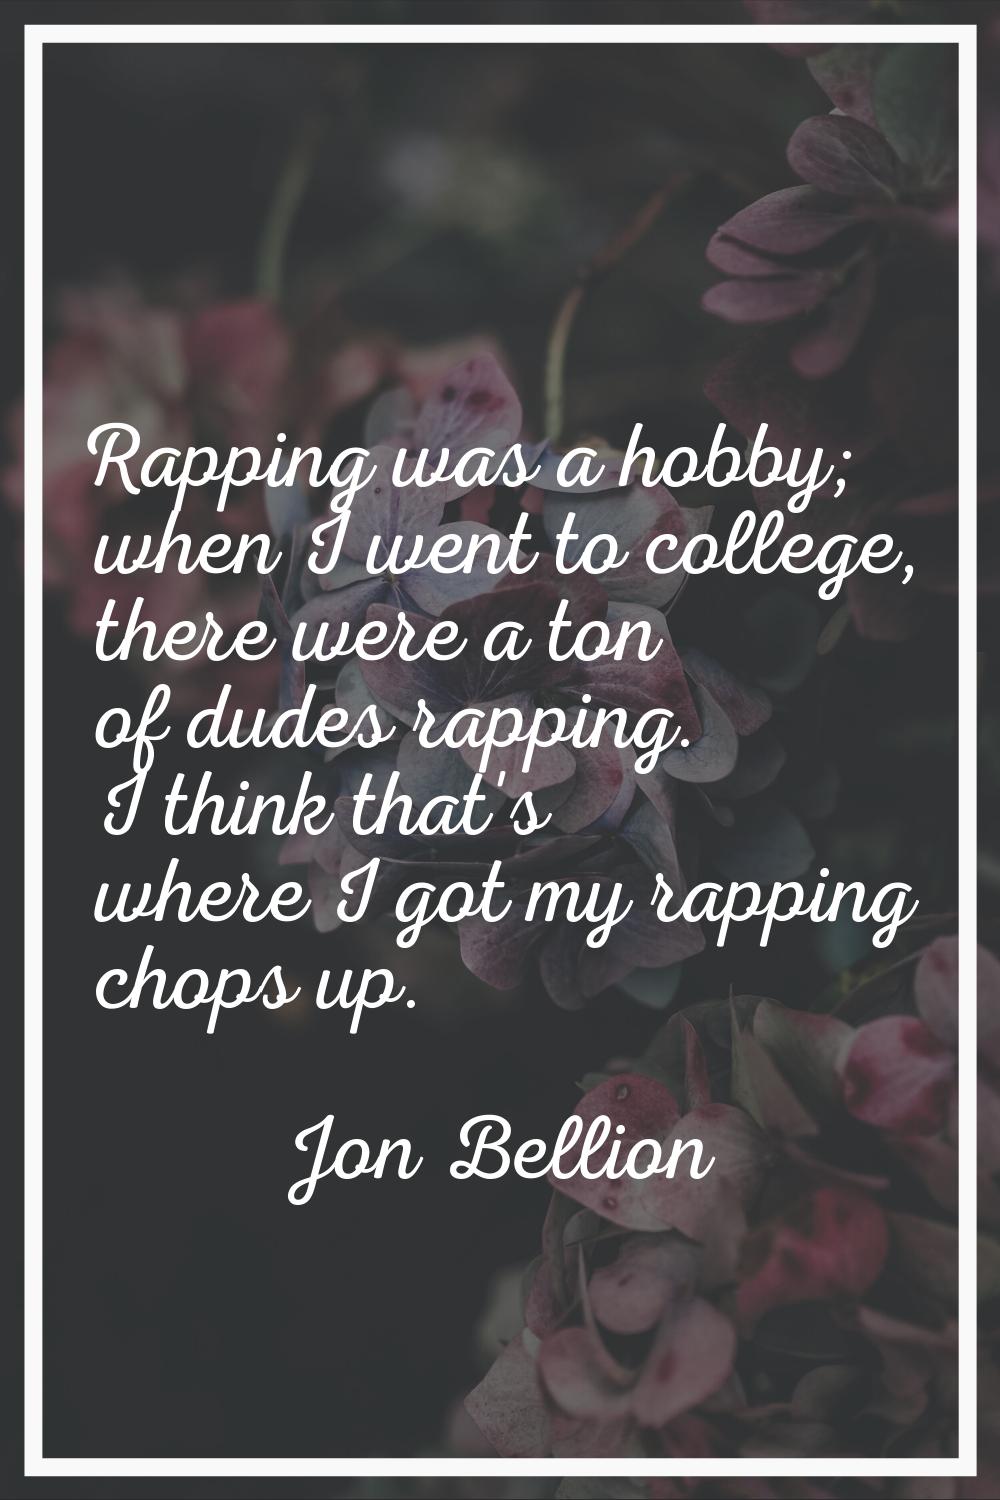 Rapping was a hobby; when I went to college, there were a ton of dudes rapping. I think that's wher